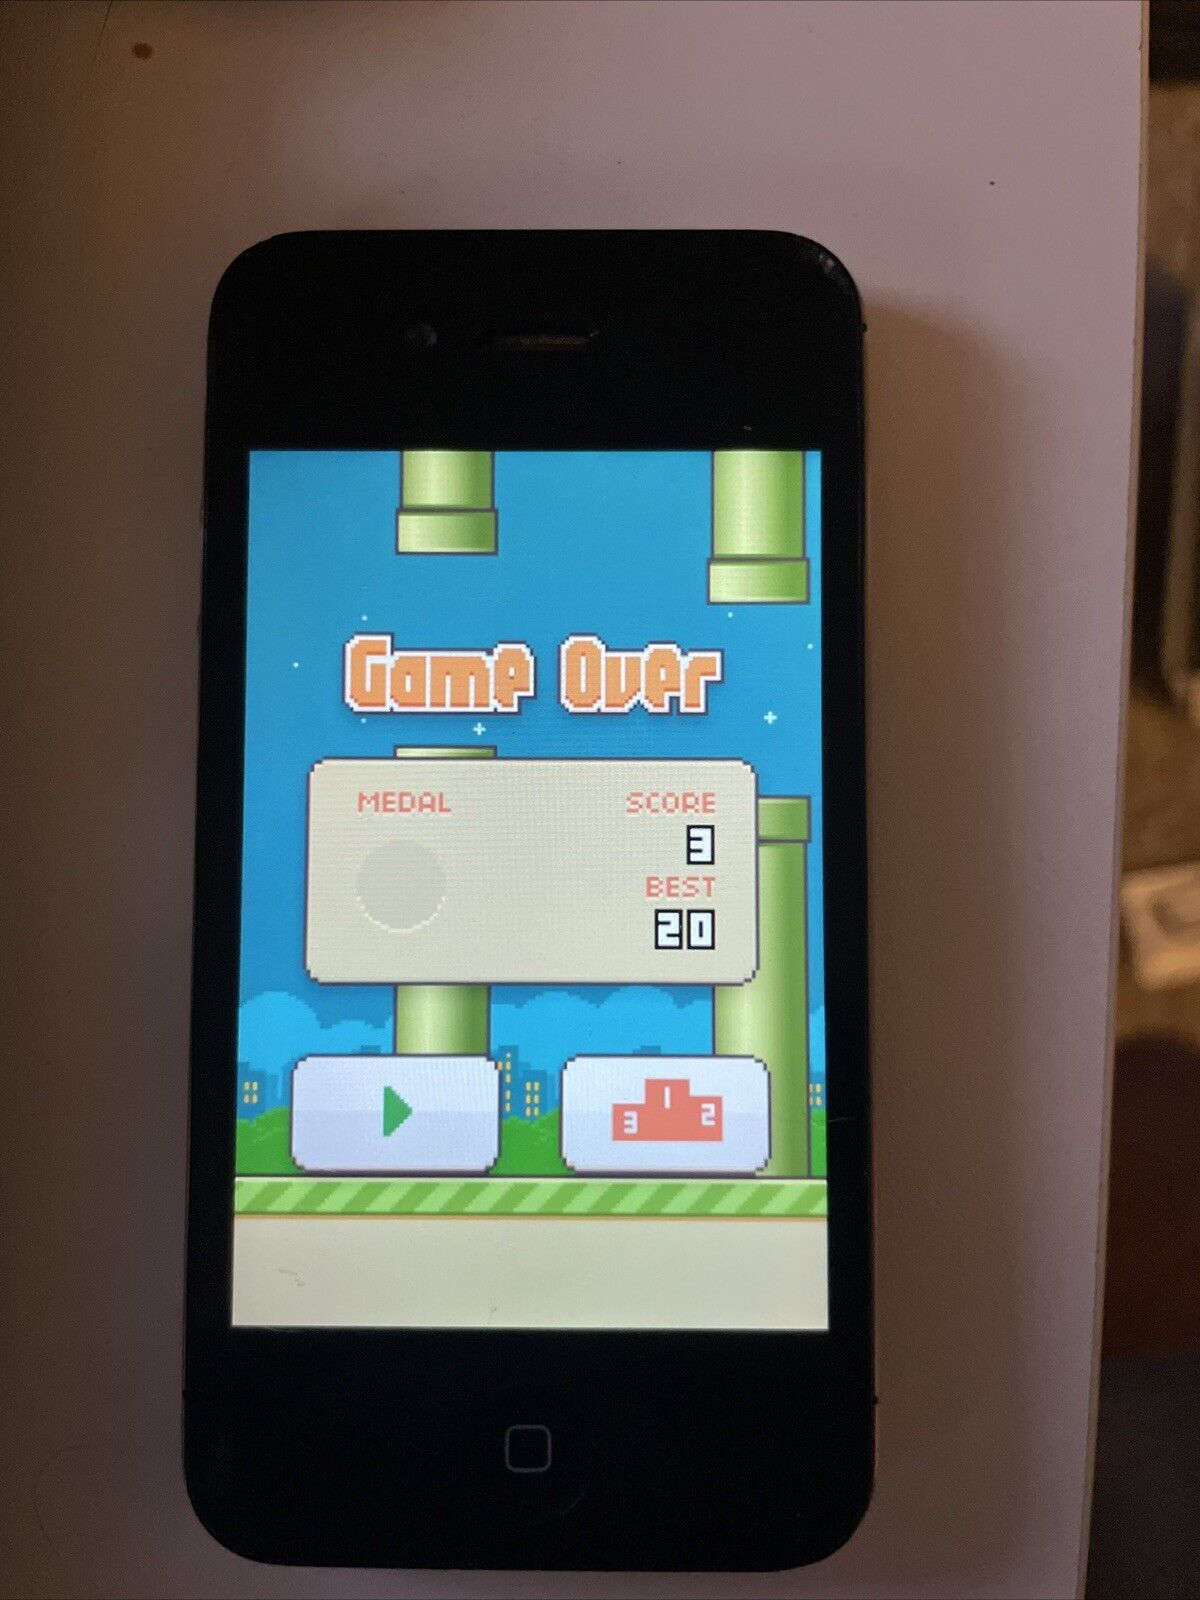 Rare Collectible Refurbished iPhone4s with Flappy Bird, Vine, IG and Twitter +